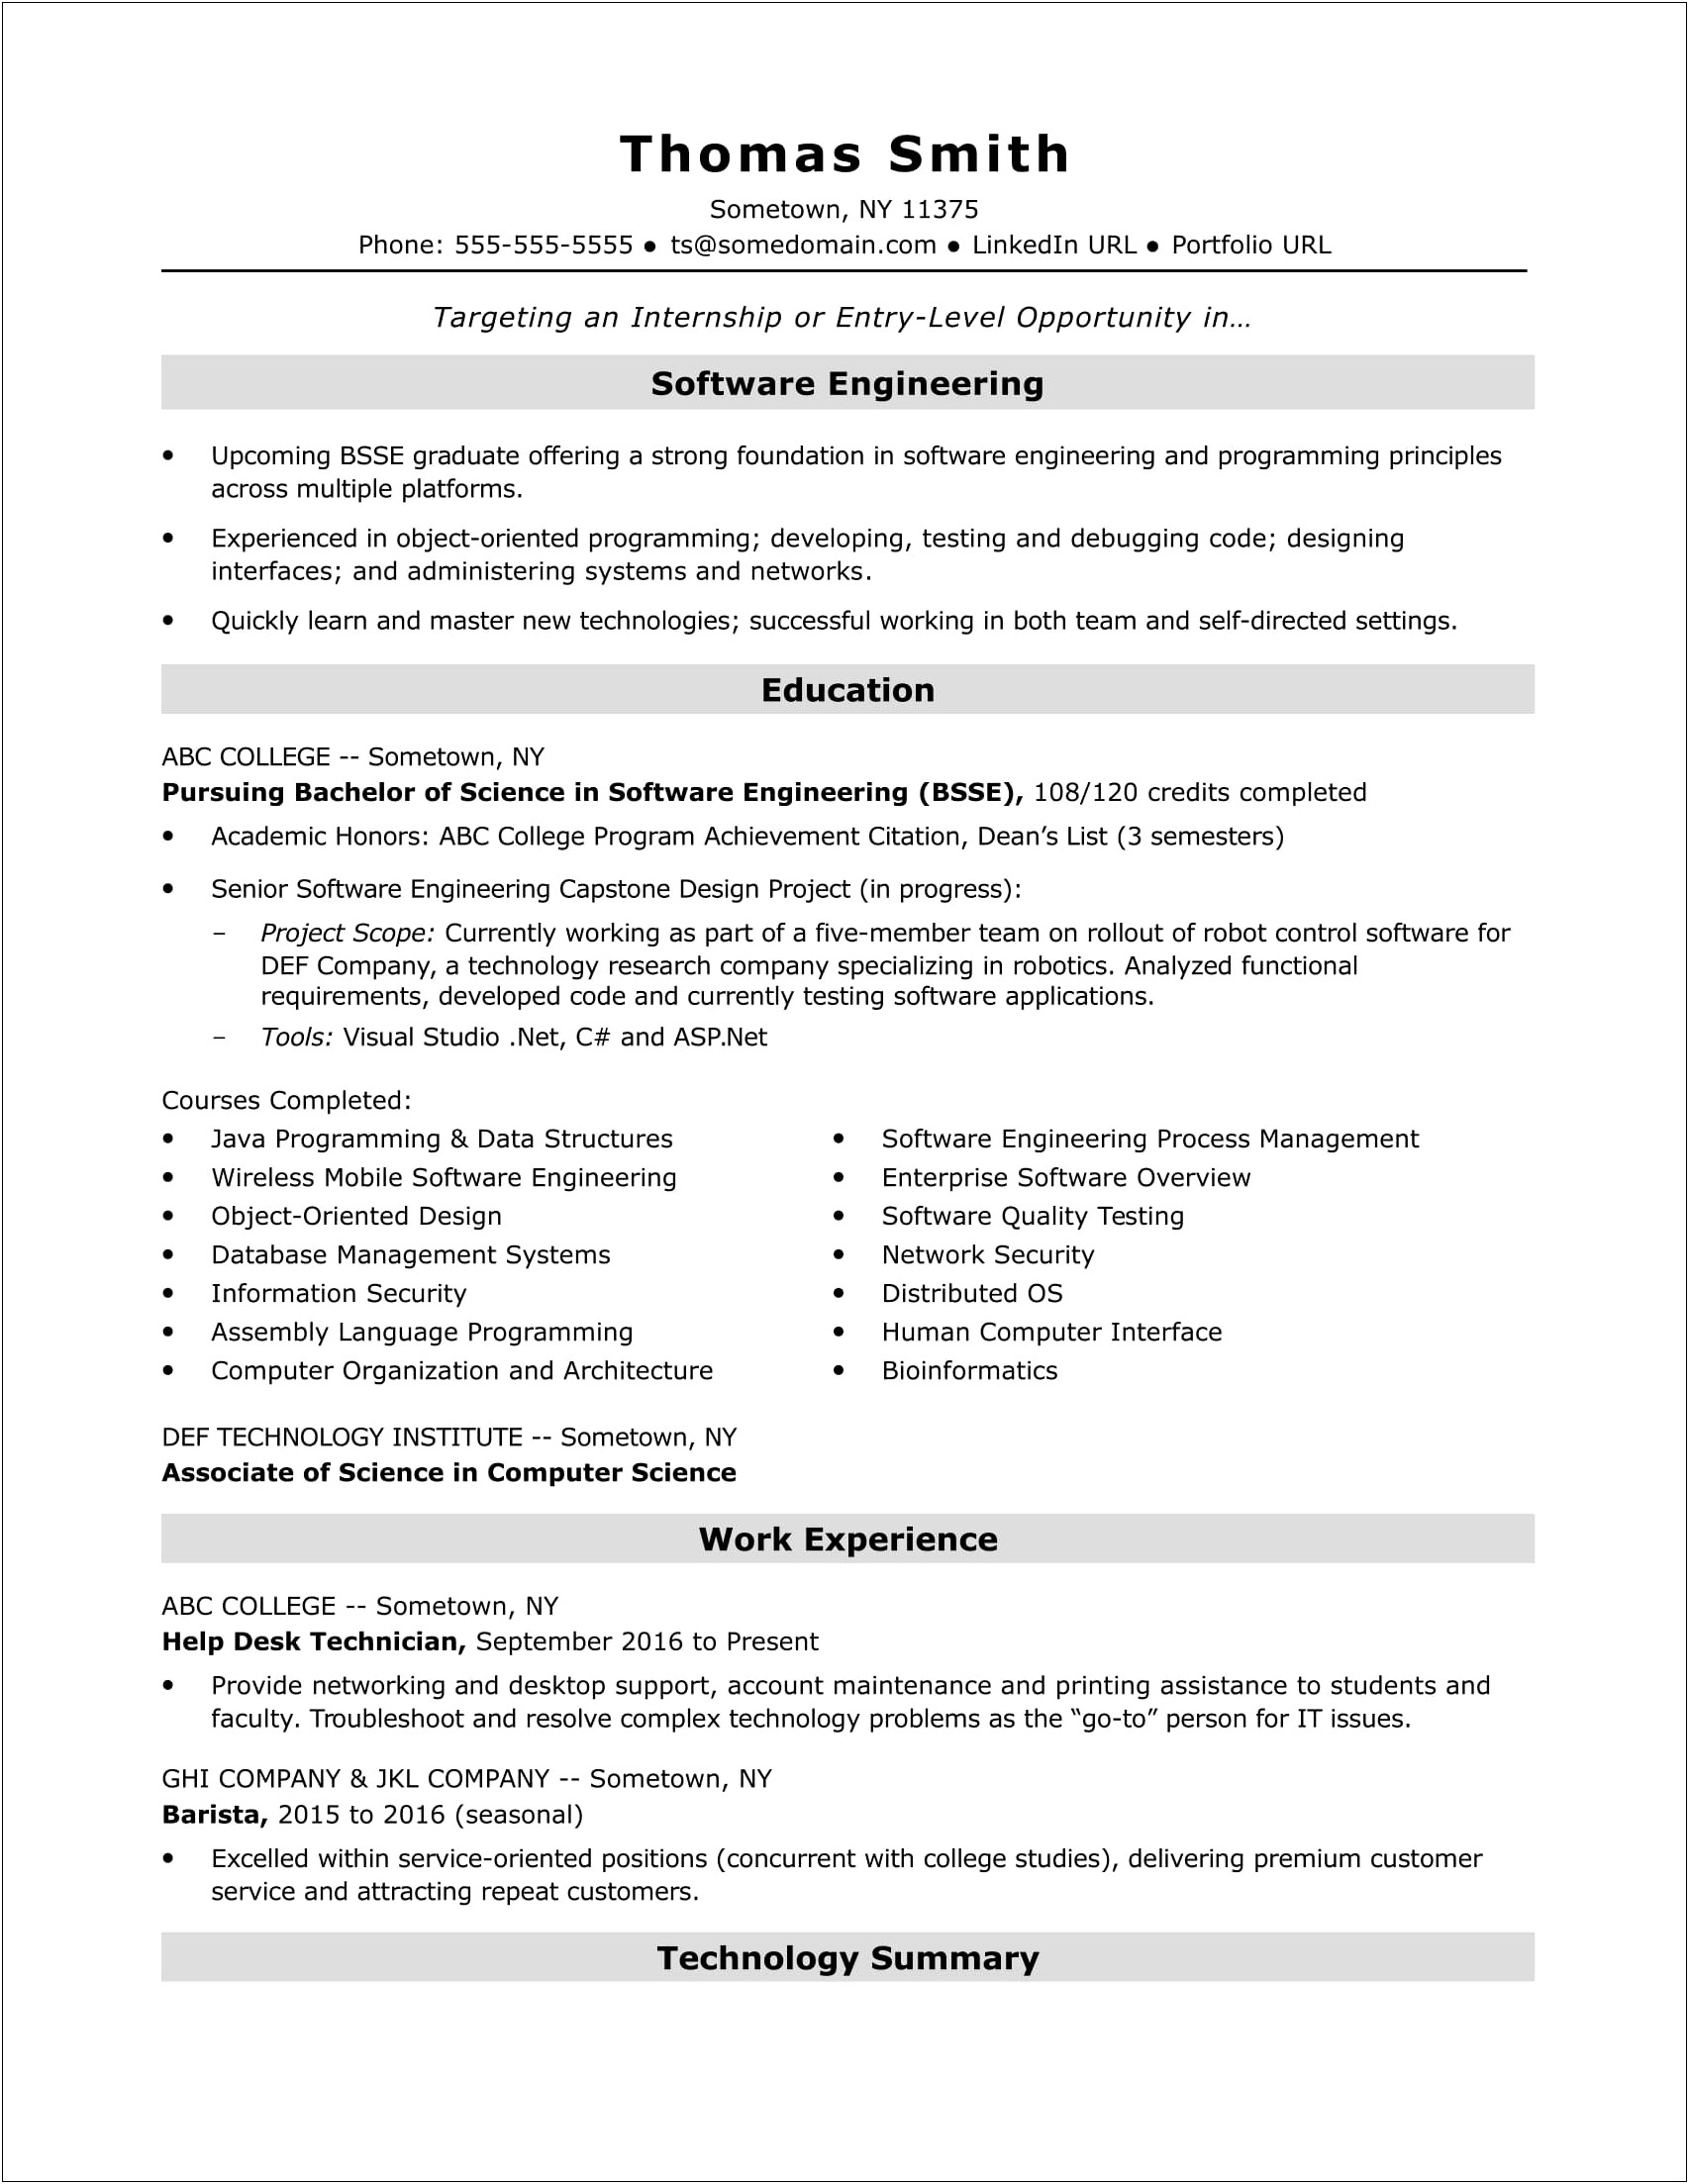 Resume Format For Computer Science Engineering Experience